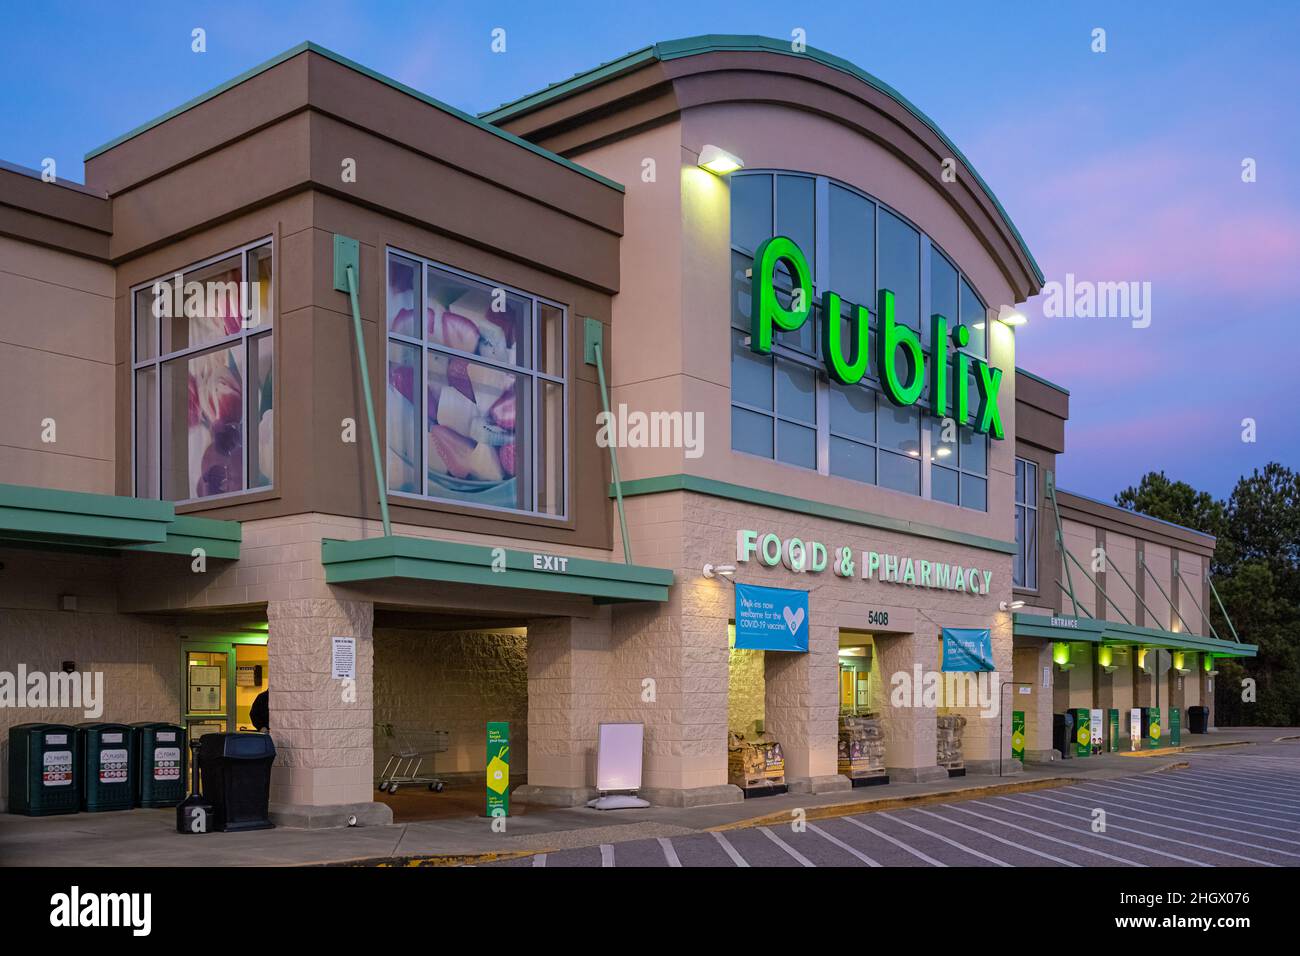 Publix Food and Pharmacy in der Abenddämmerung in Phenix City, Alabama. (USA) Stockfoto